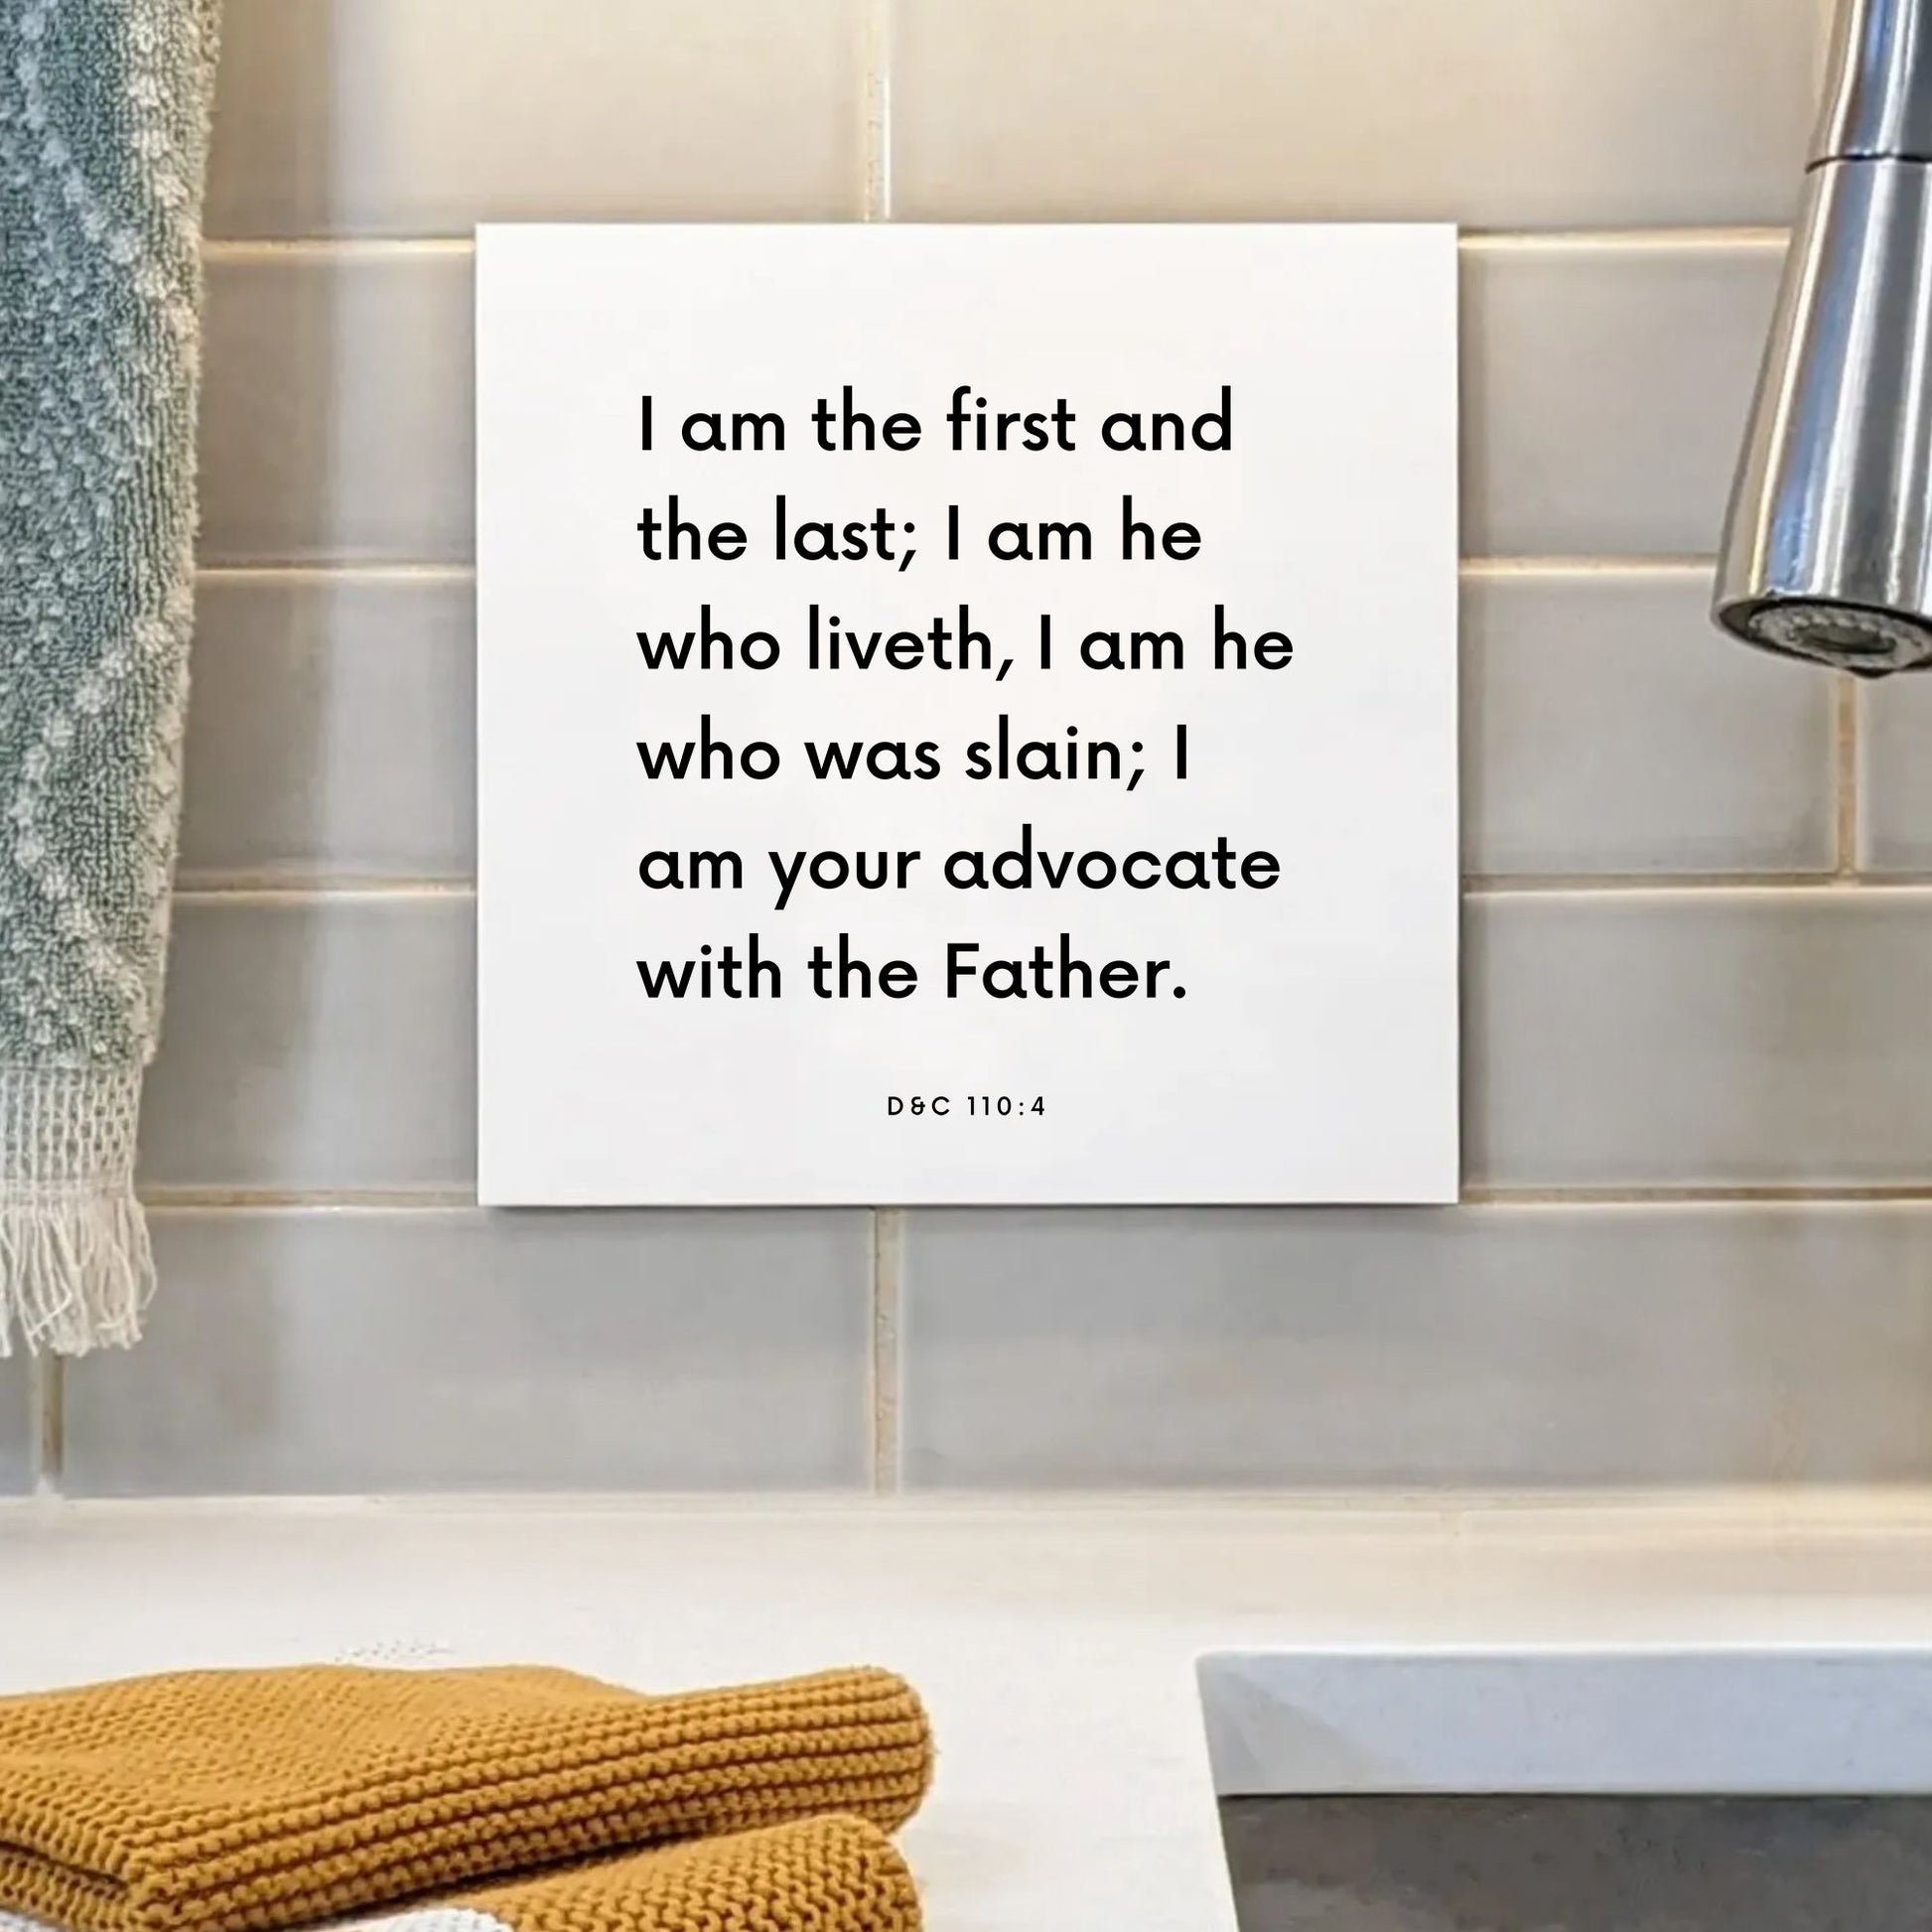 Sink mouting of the scripture tile for D&C 110:4 - "I am your advocate with the Father"